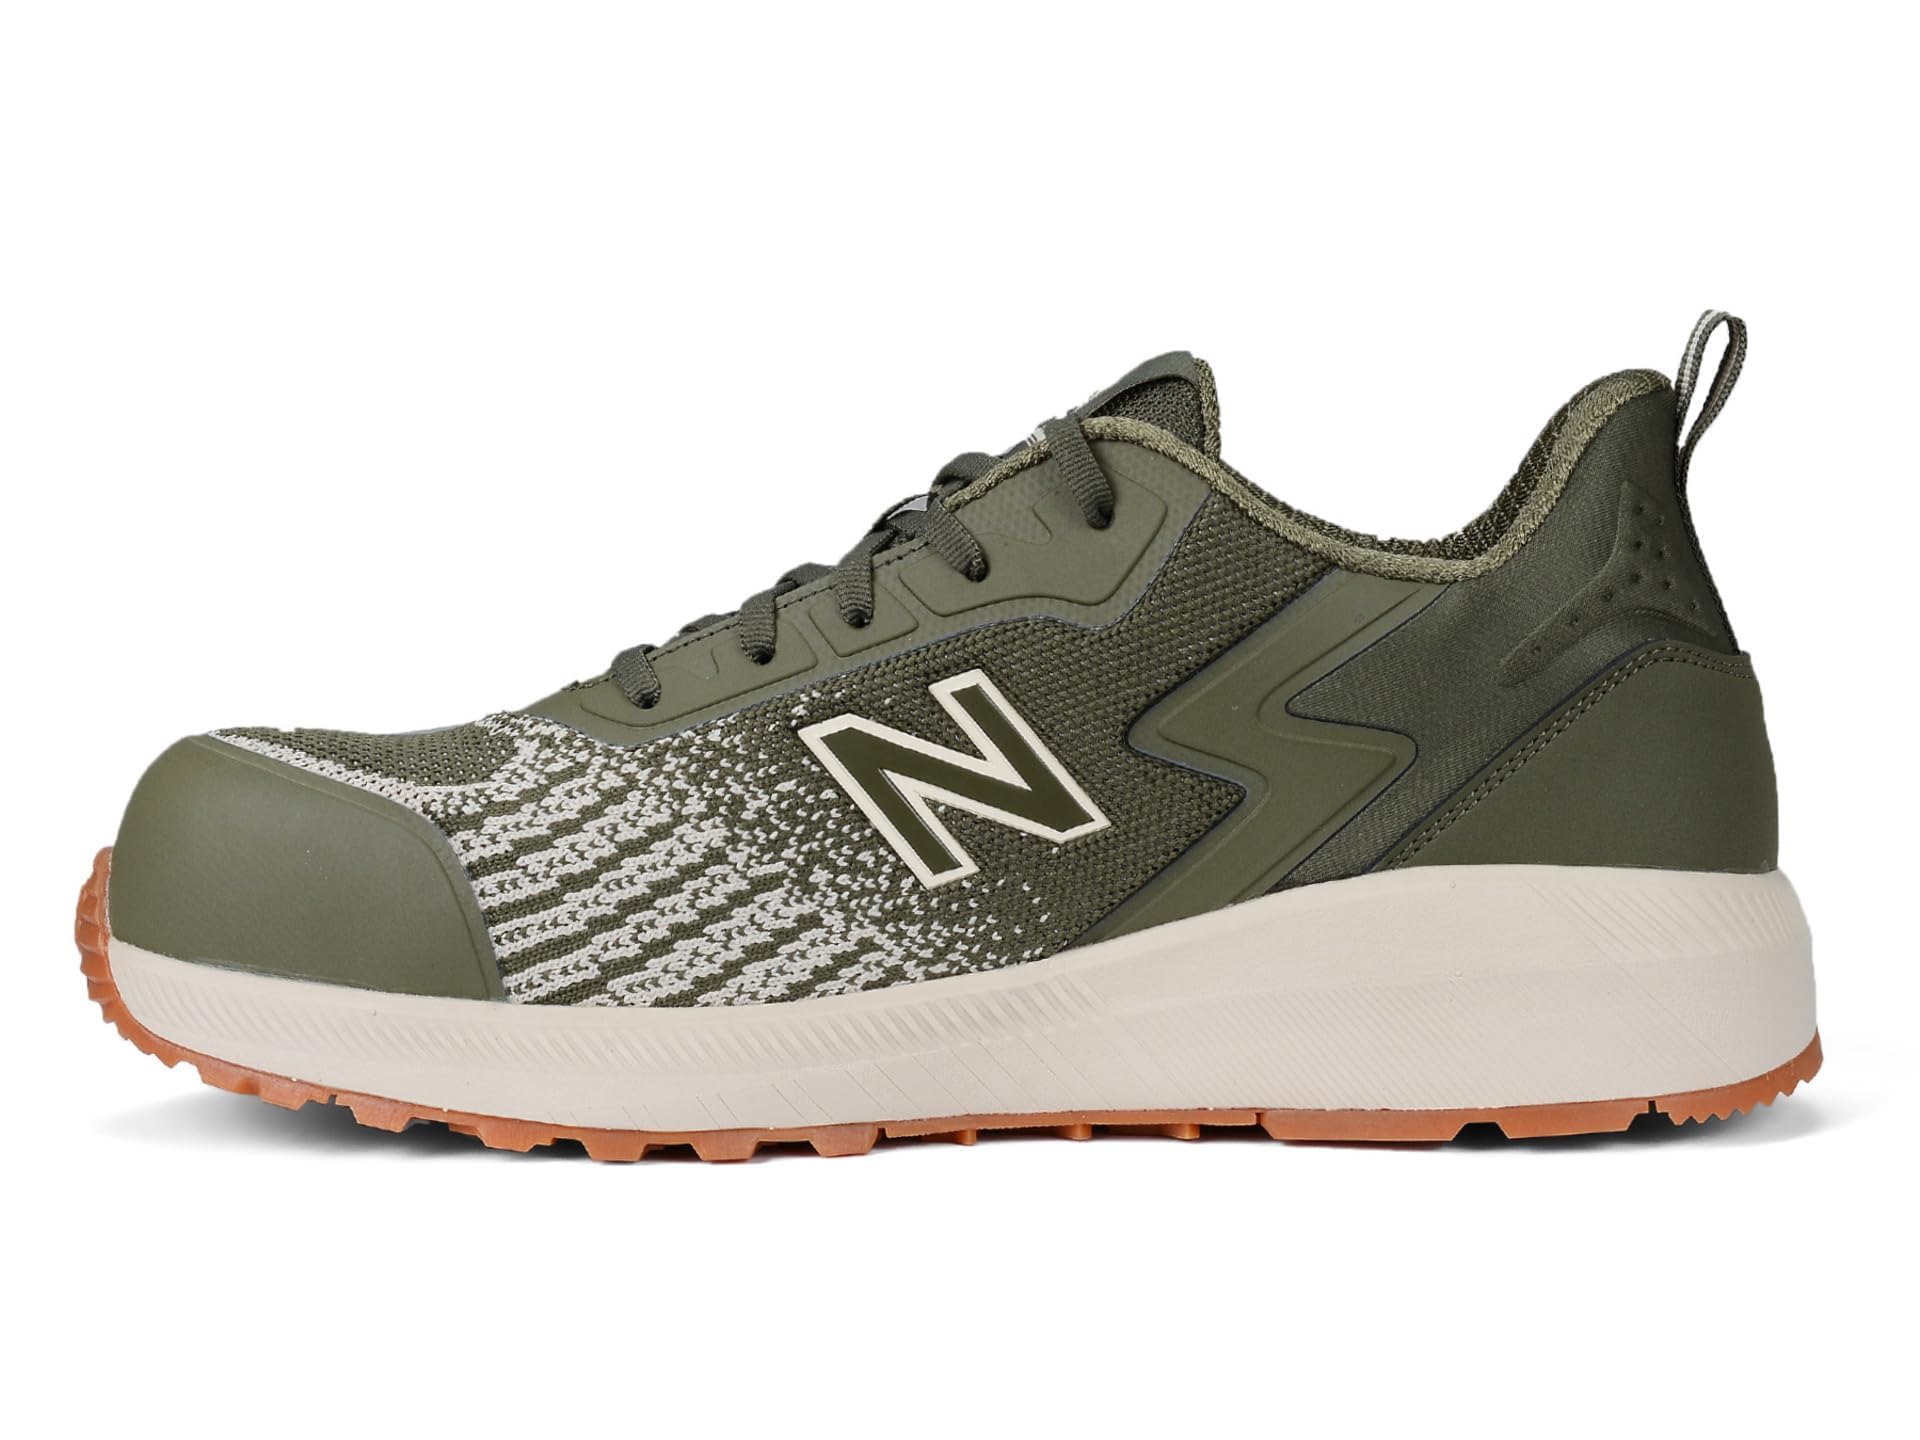 New Balance Speedware Composite Toe Men's Industrial Work Shoes, Olive/White, Size 10.5, Medium, Comfortable & Lightweight Work Shoes for Men, Electric Hazard, Puncture & Slip Resistant